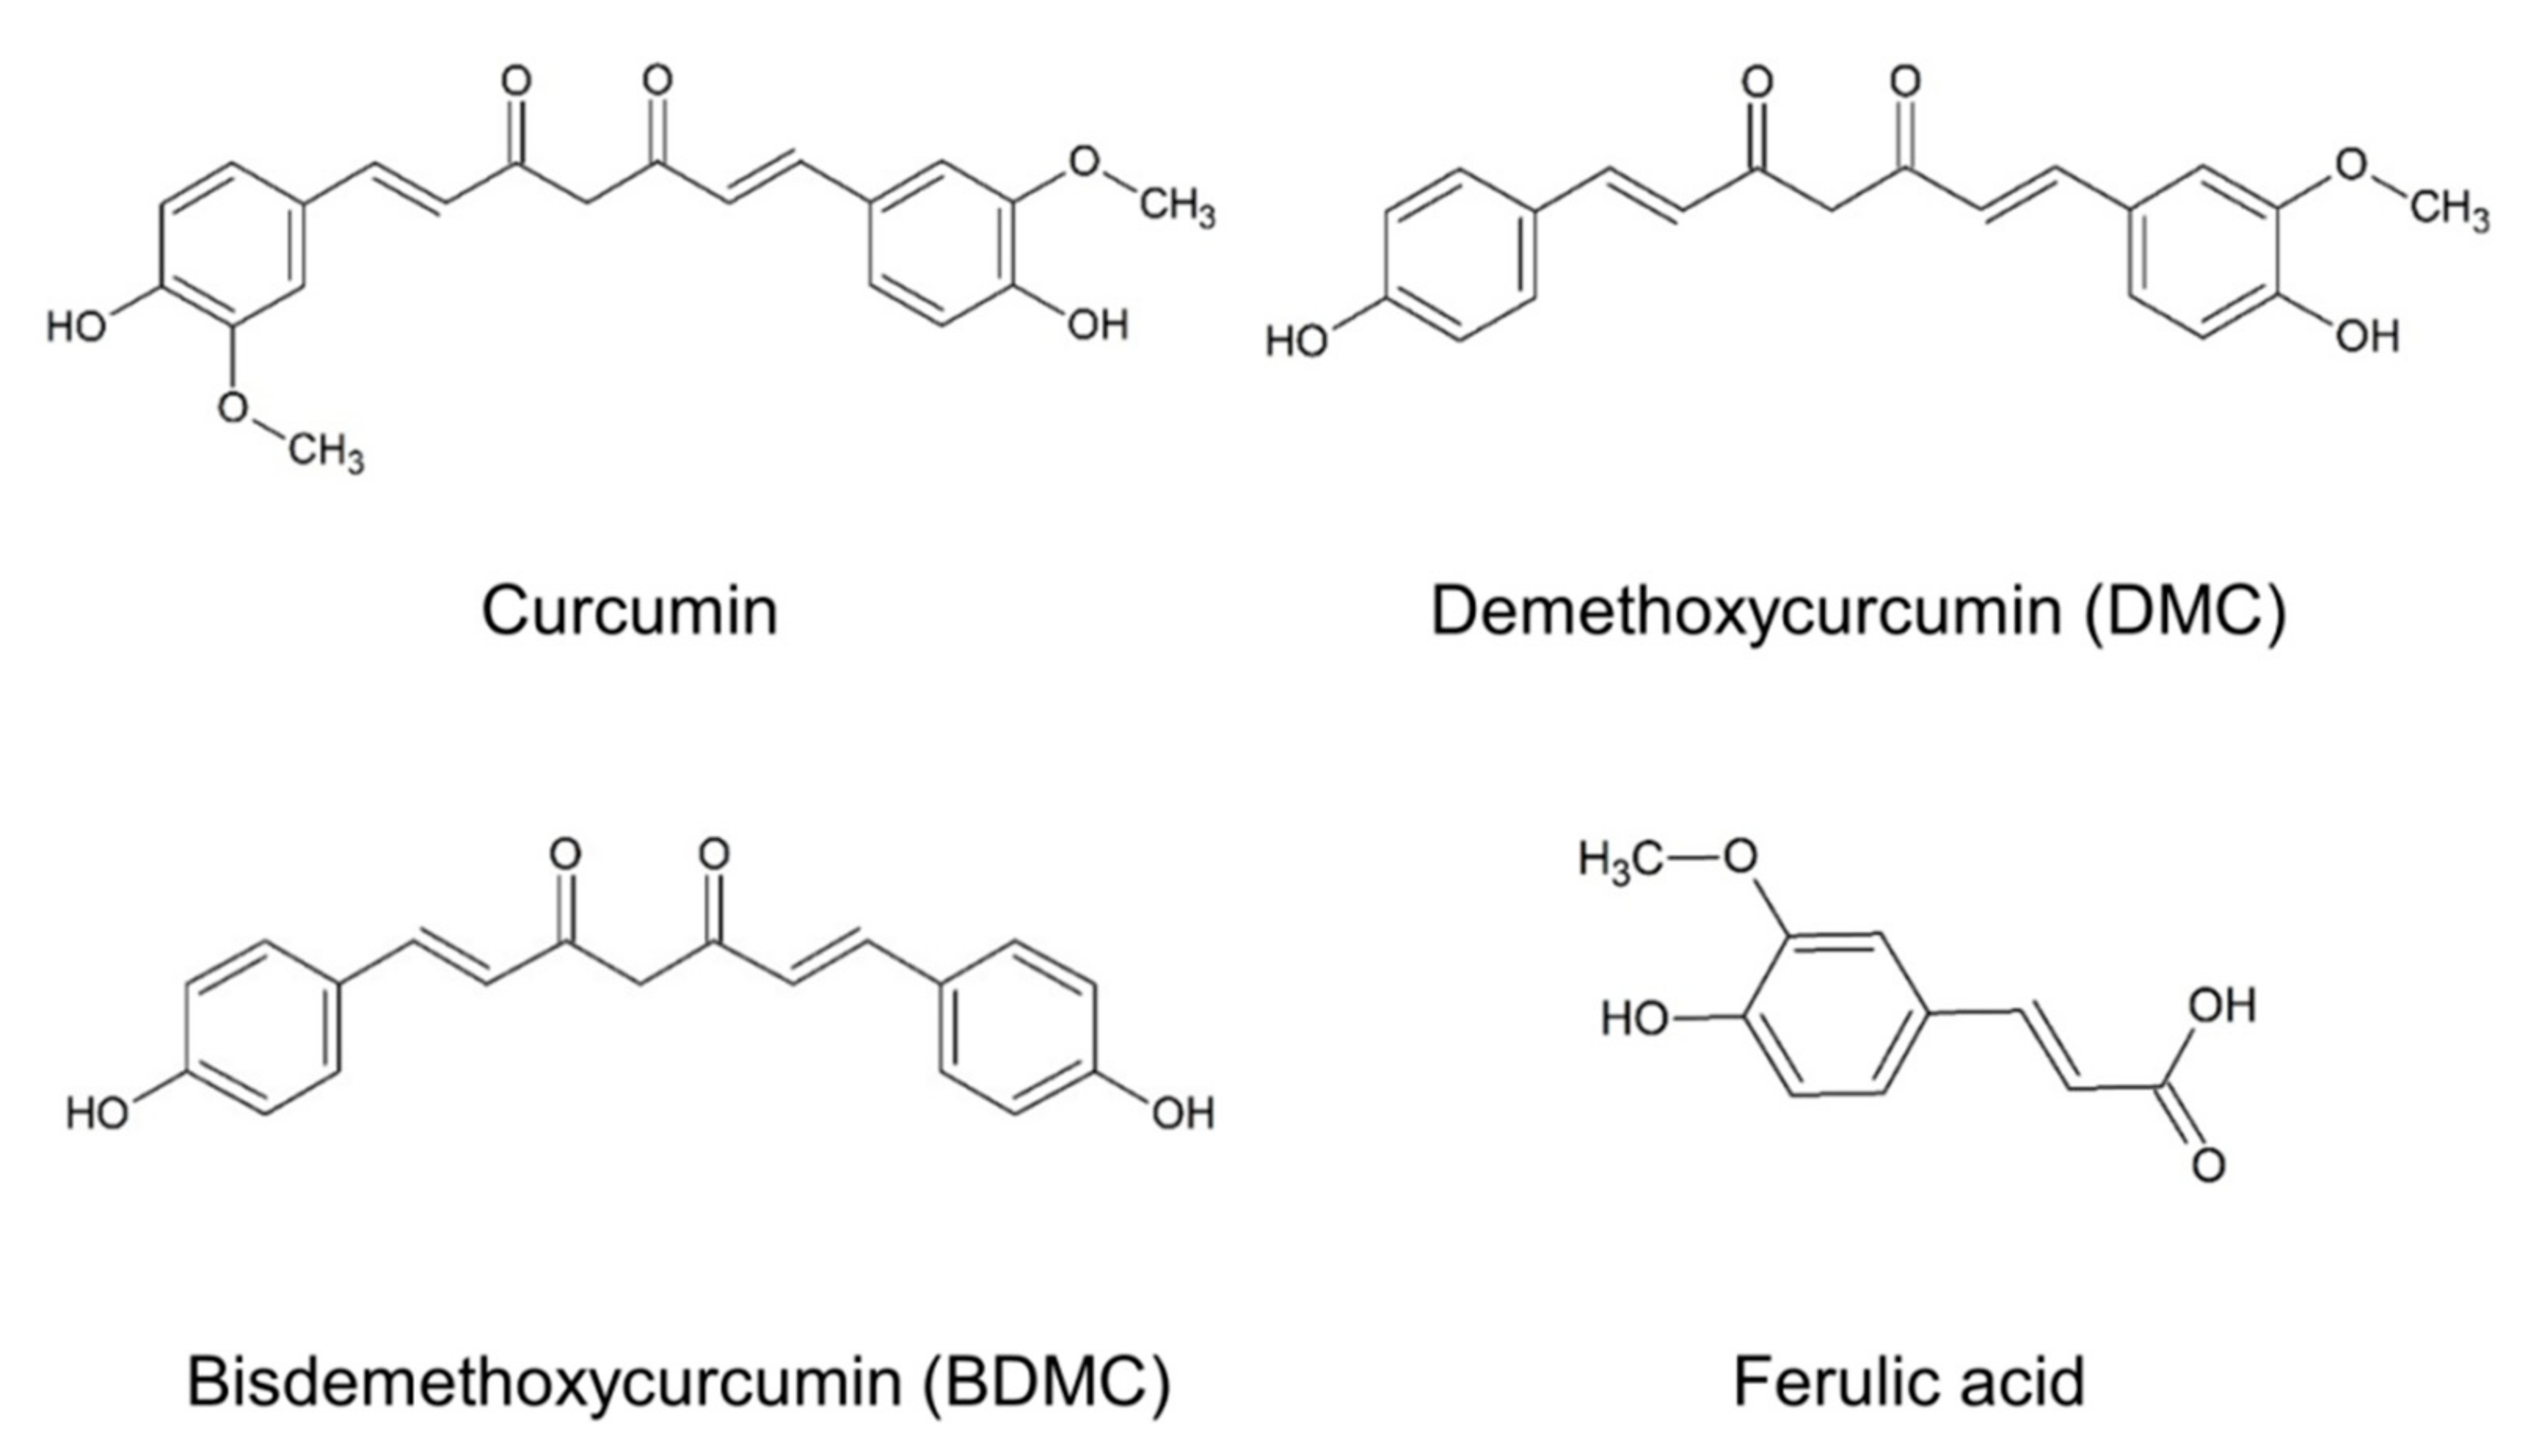 The Demethoxy Derivatives of Curcumin Exhibit Greater Differentiation Suppression in 3T3-L1 Adipocytes Than Curcumin: A Mechanistic Study of Adipogenesis and Molecular Docking